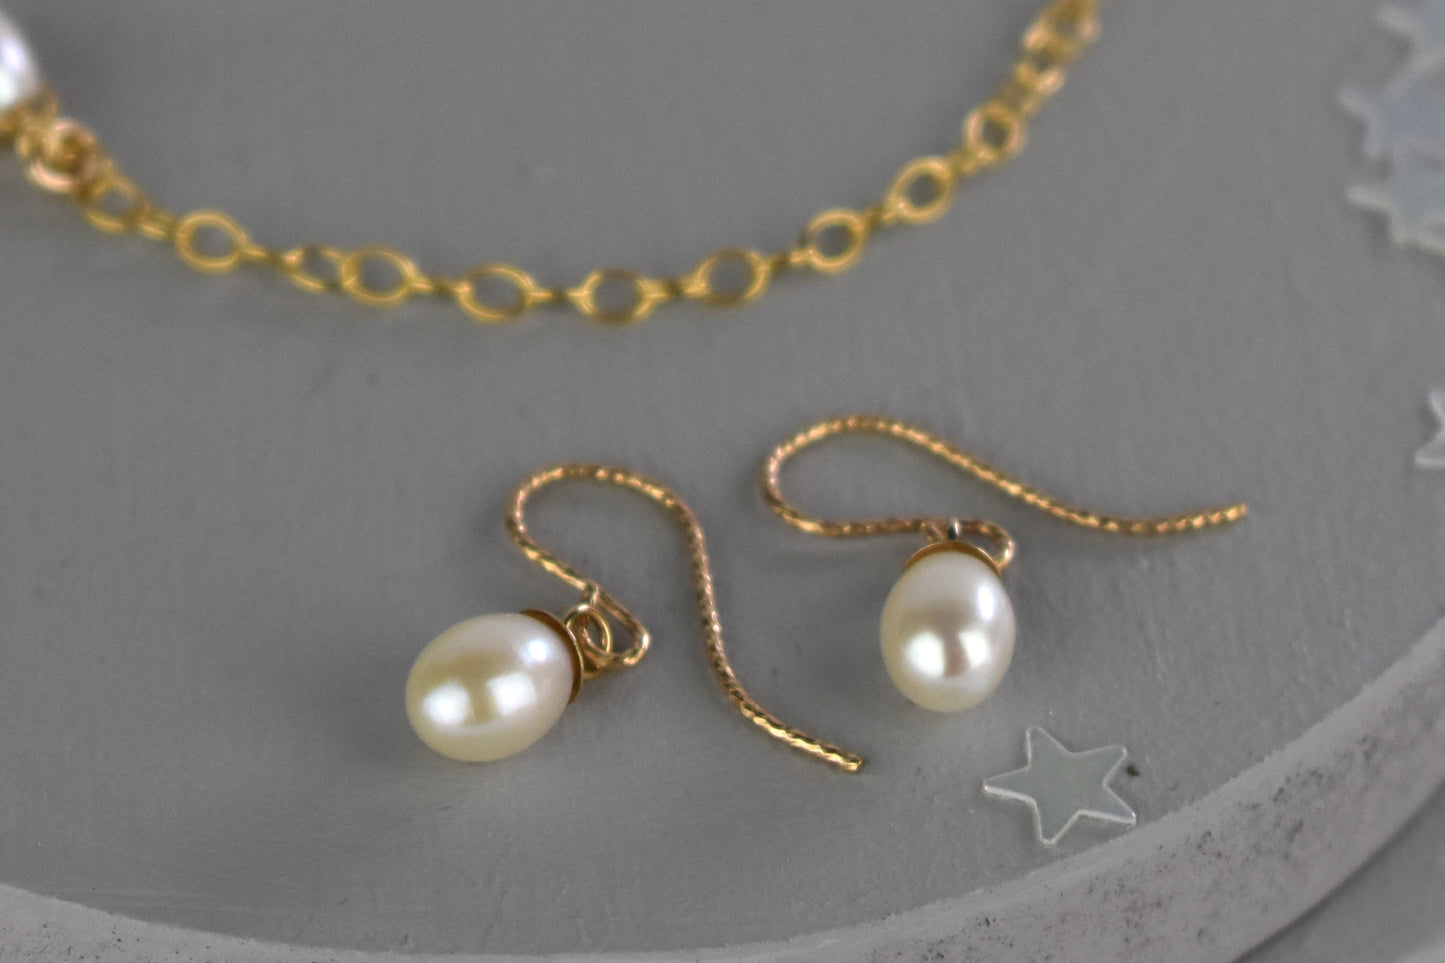 AAA quality Freshwater pearls on gold earwires.